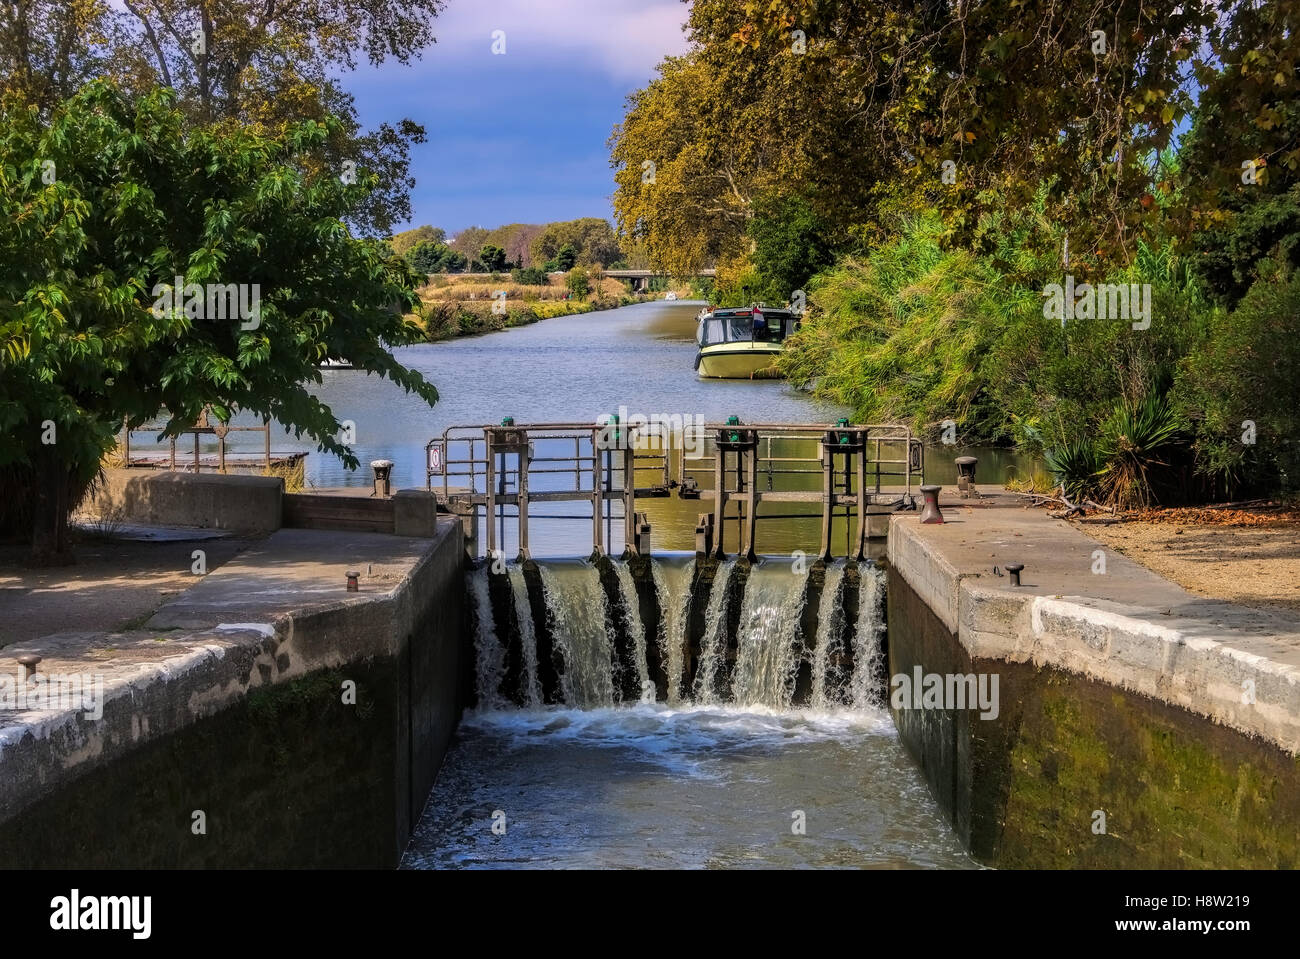 Canal du Midi Schleuse - Canal du Midi water lock in France Stock Photo